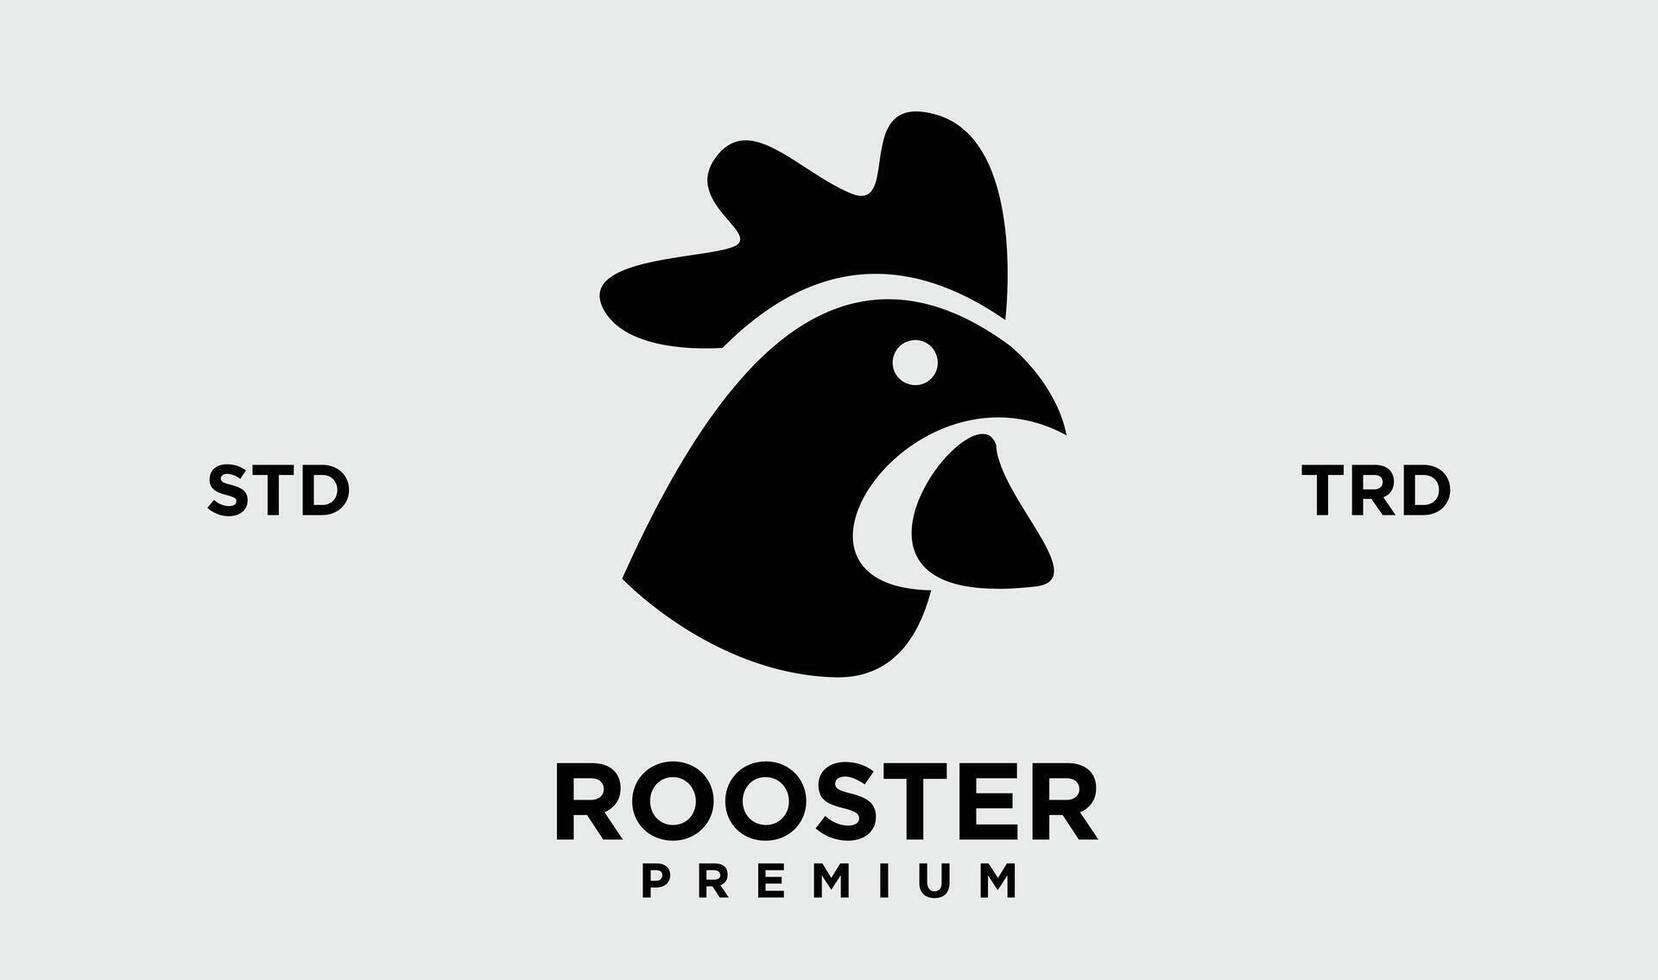 Rooster silhouette icon Vector illustration on white background